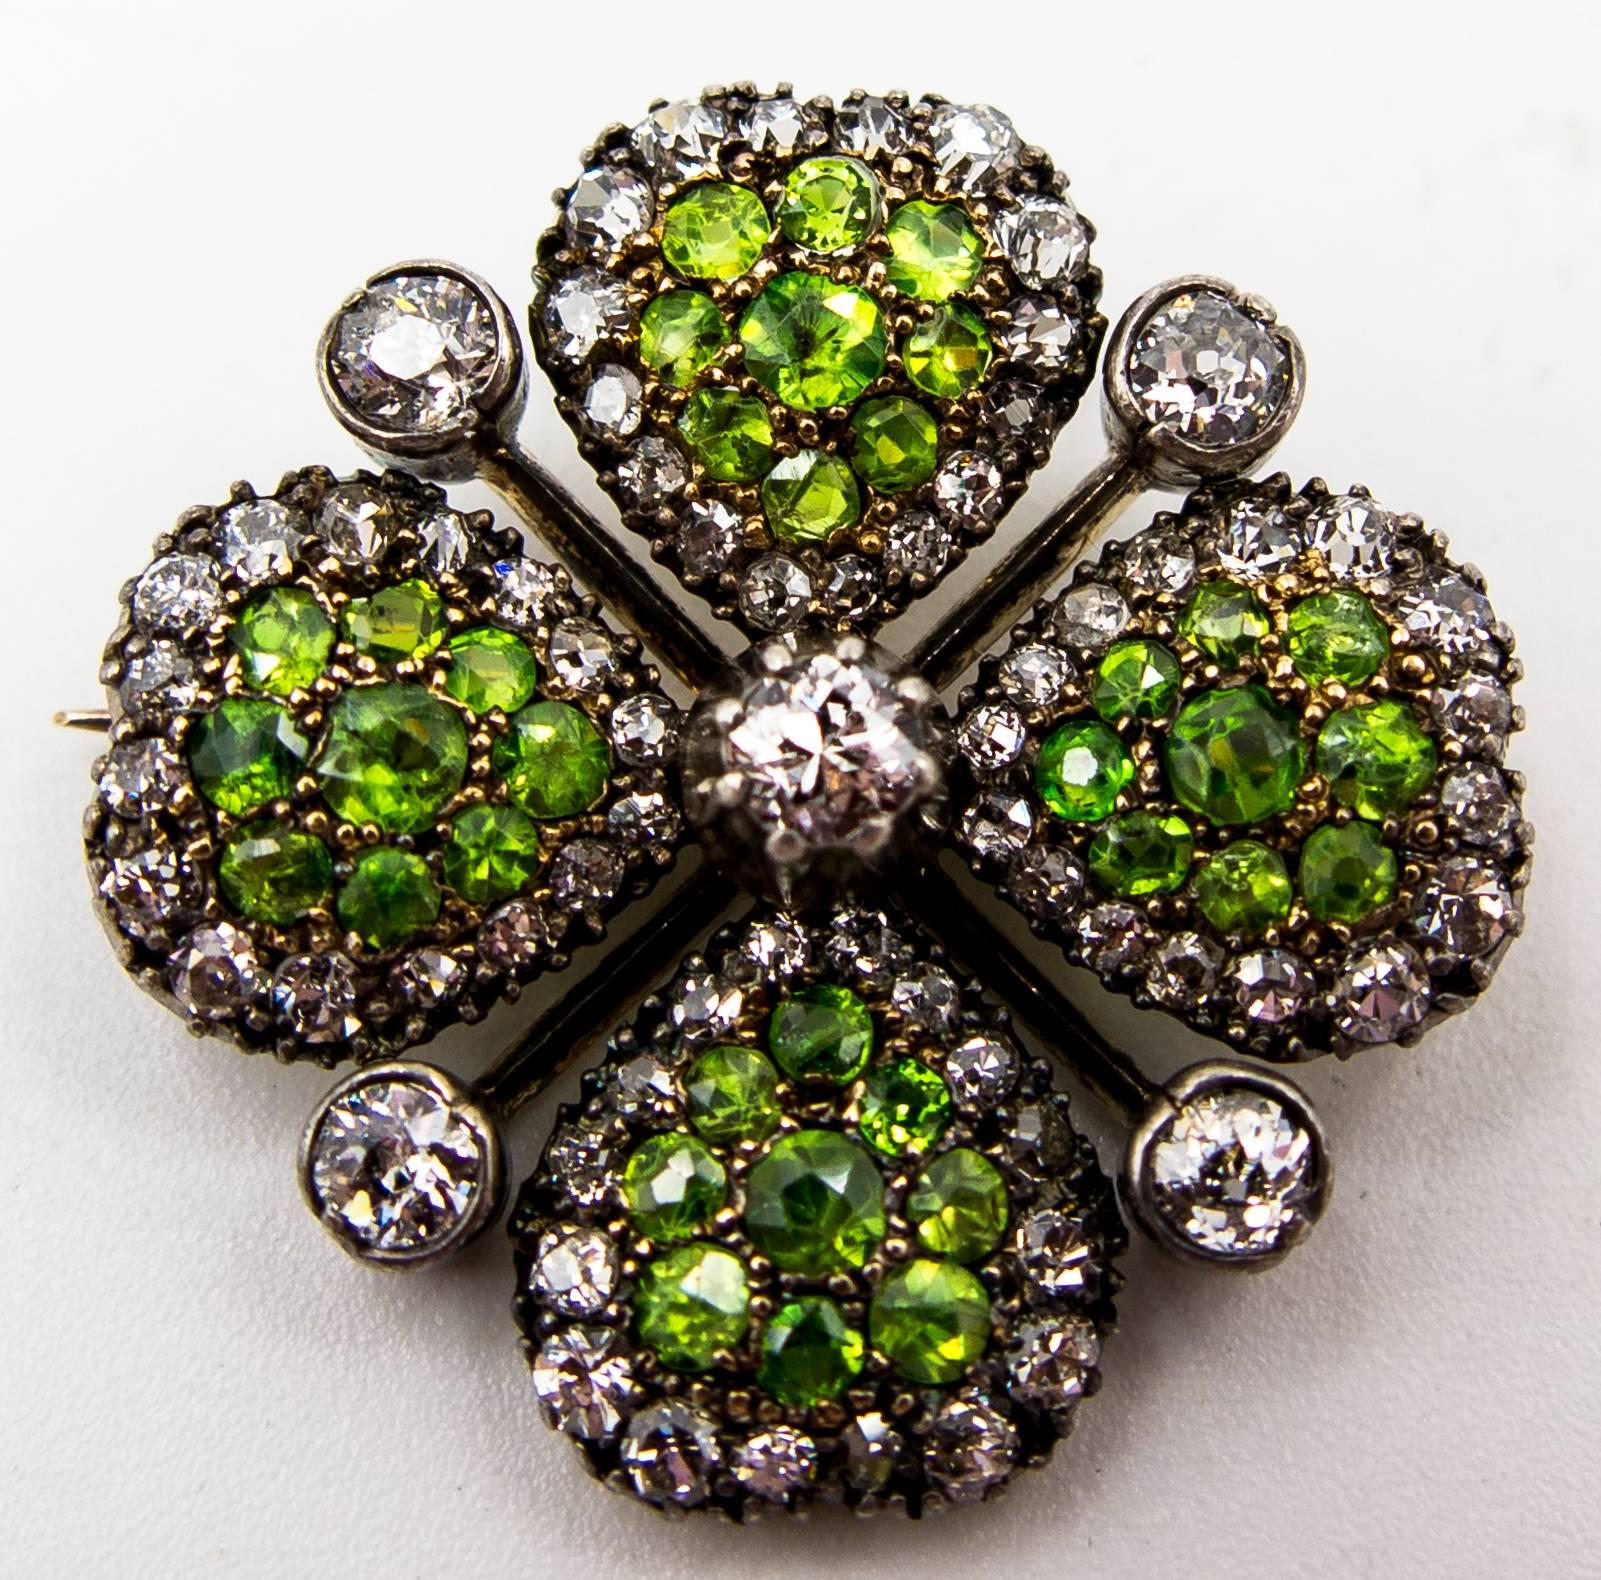 A four leaf clover traditionally signifies the assurance of good luck, and while we cannot guarantee good fortune, we can definitely assure the wearer that this charming little jewel will attract much attention. Demantoid garnets are the rarest and